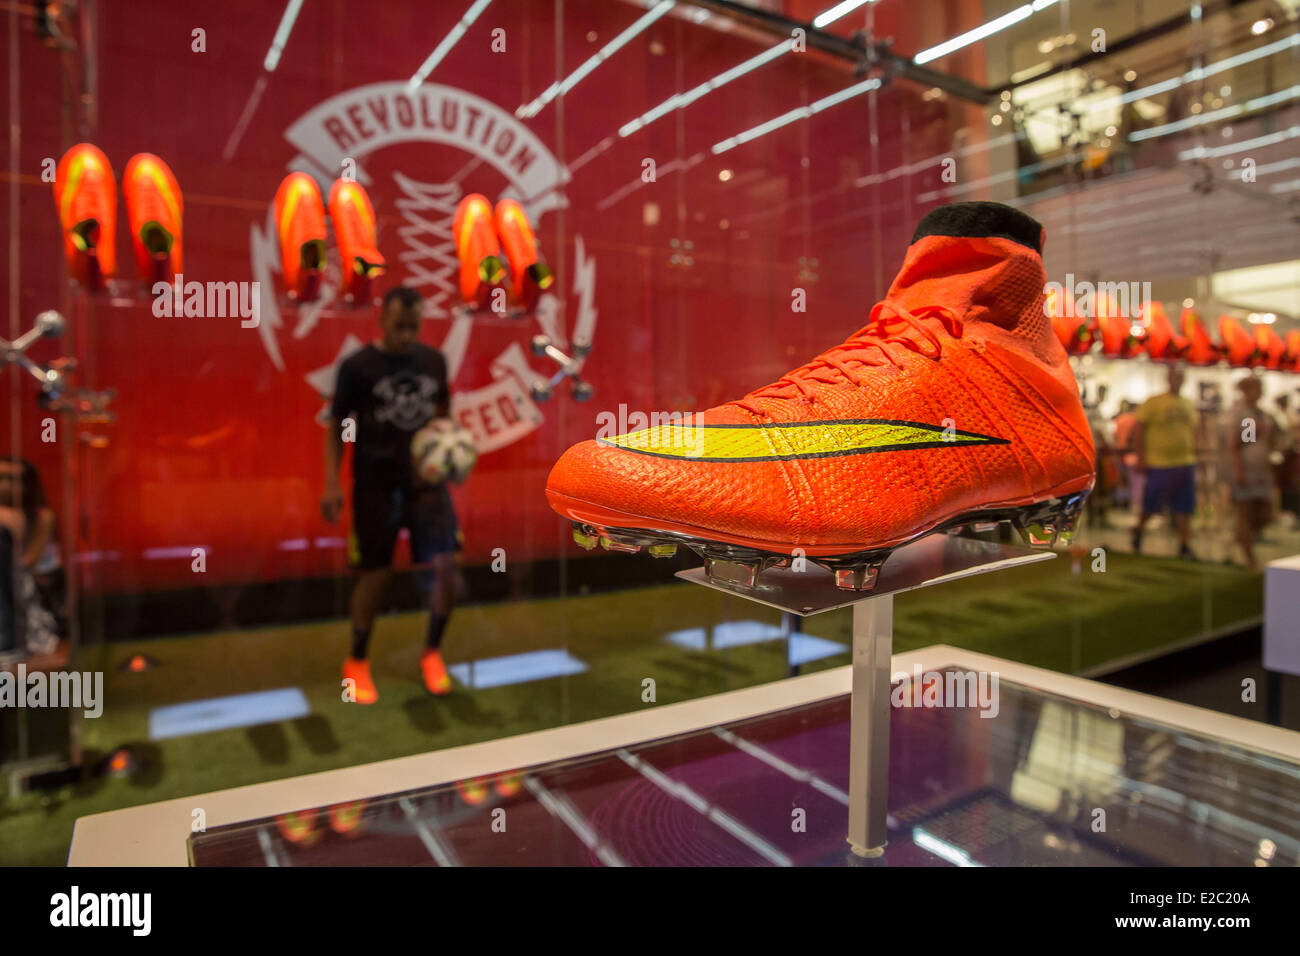 nike store usa soccer shoes